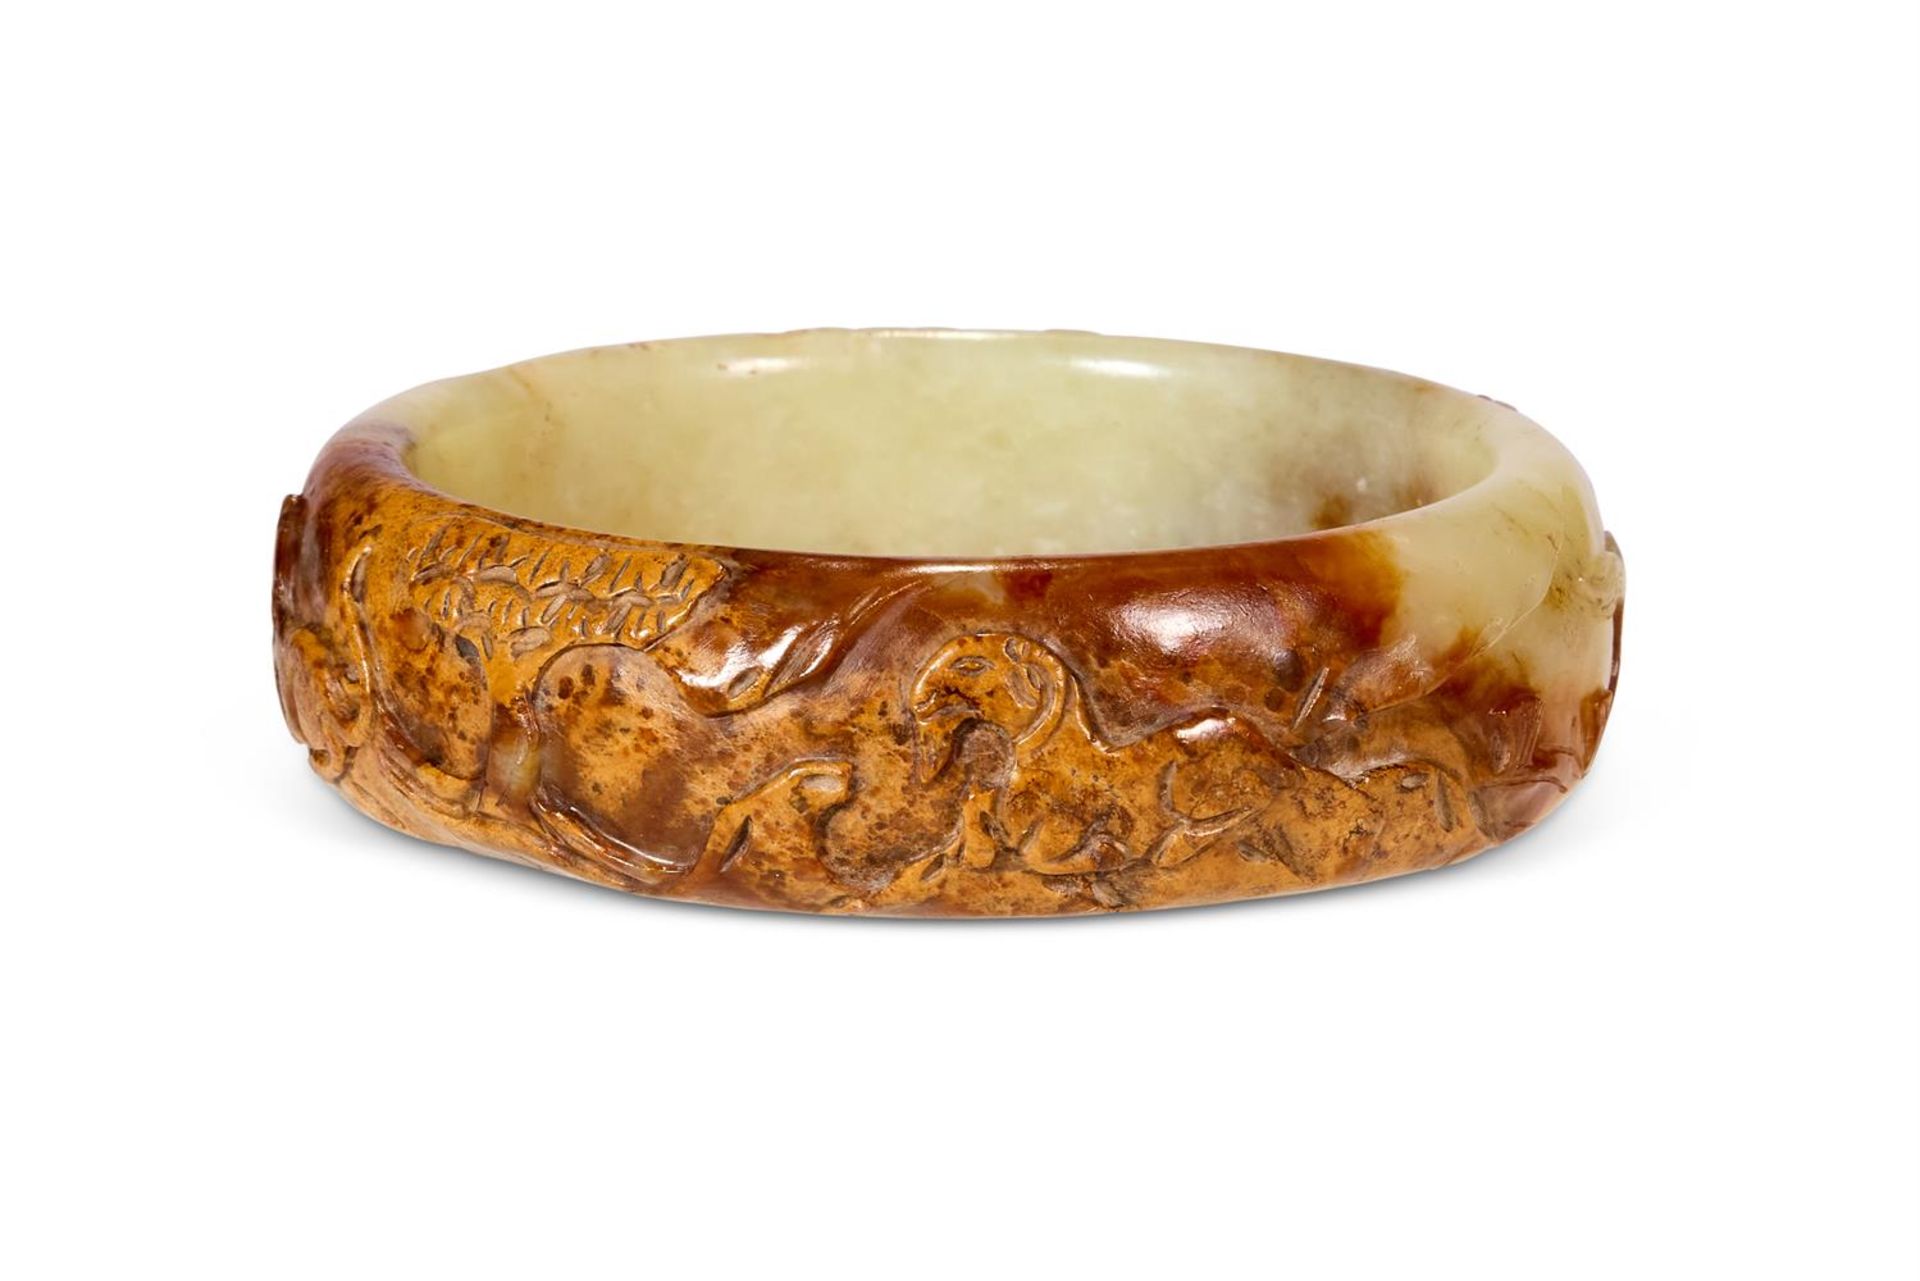 A CHINESE MOTTLED GREEN AND BROWN JADE BRACELET, QING DYNASTY (1644-1911)